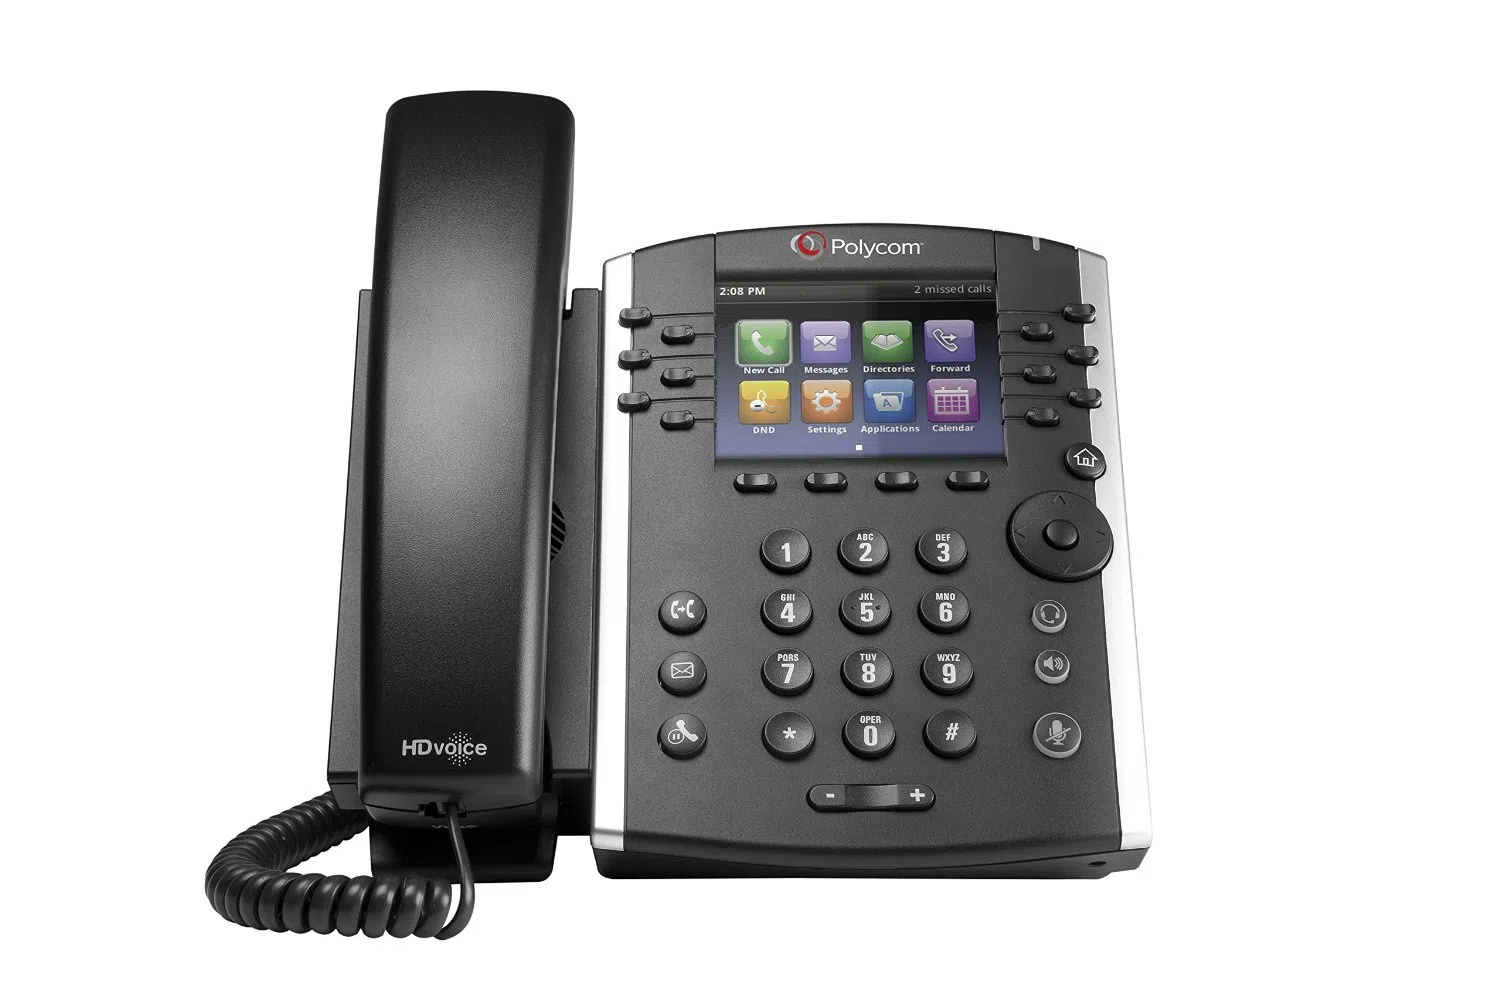 Do you offer a buyback option for the Polycom VVX 410 Refresh, like new?